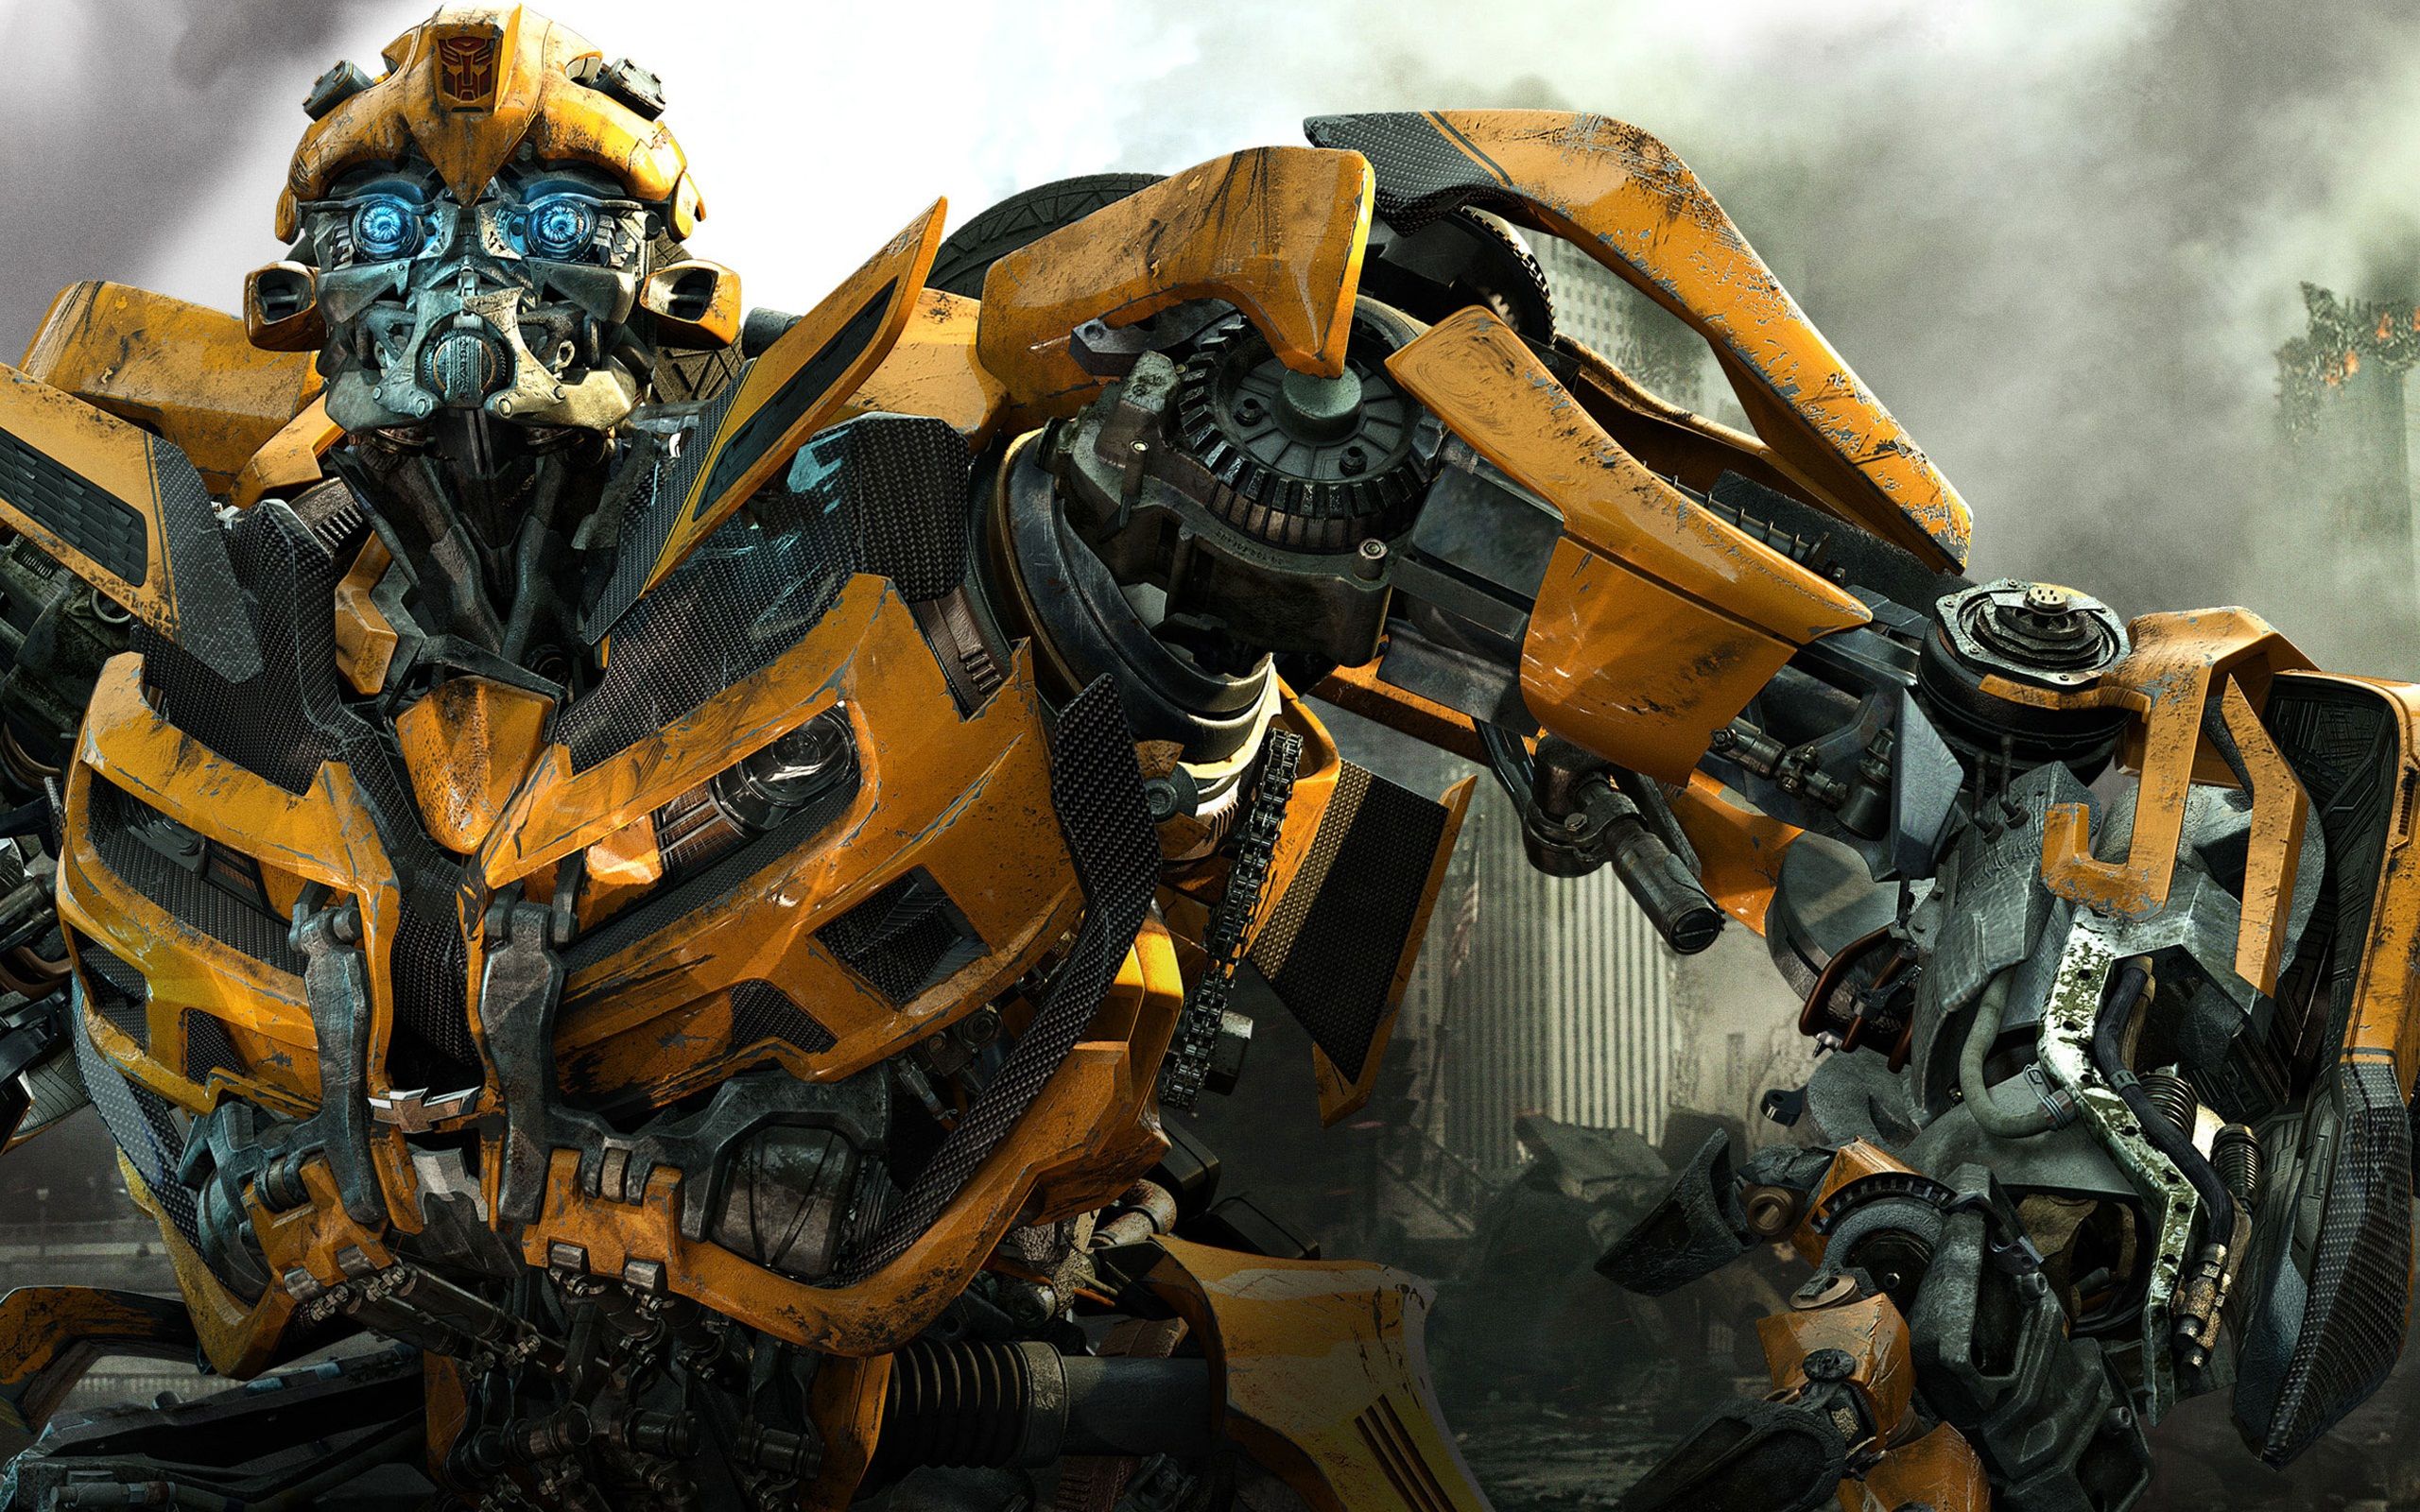 Free download Transformers 3 Bumblebee Wallpaper HD Wallpaper [2560x1600] for your Desktop, Mobile & Tablet. Explore Bumblebee Wallpaper. Bumble Bee Wallpaper Patterns, Bumble Bee Wallpaper Border, Bee Wallpaper for Walls